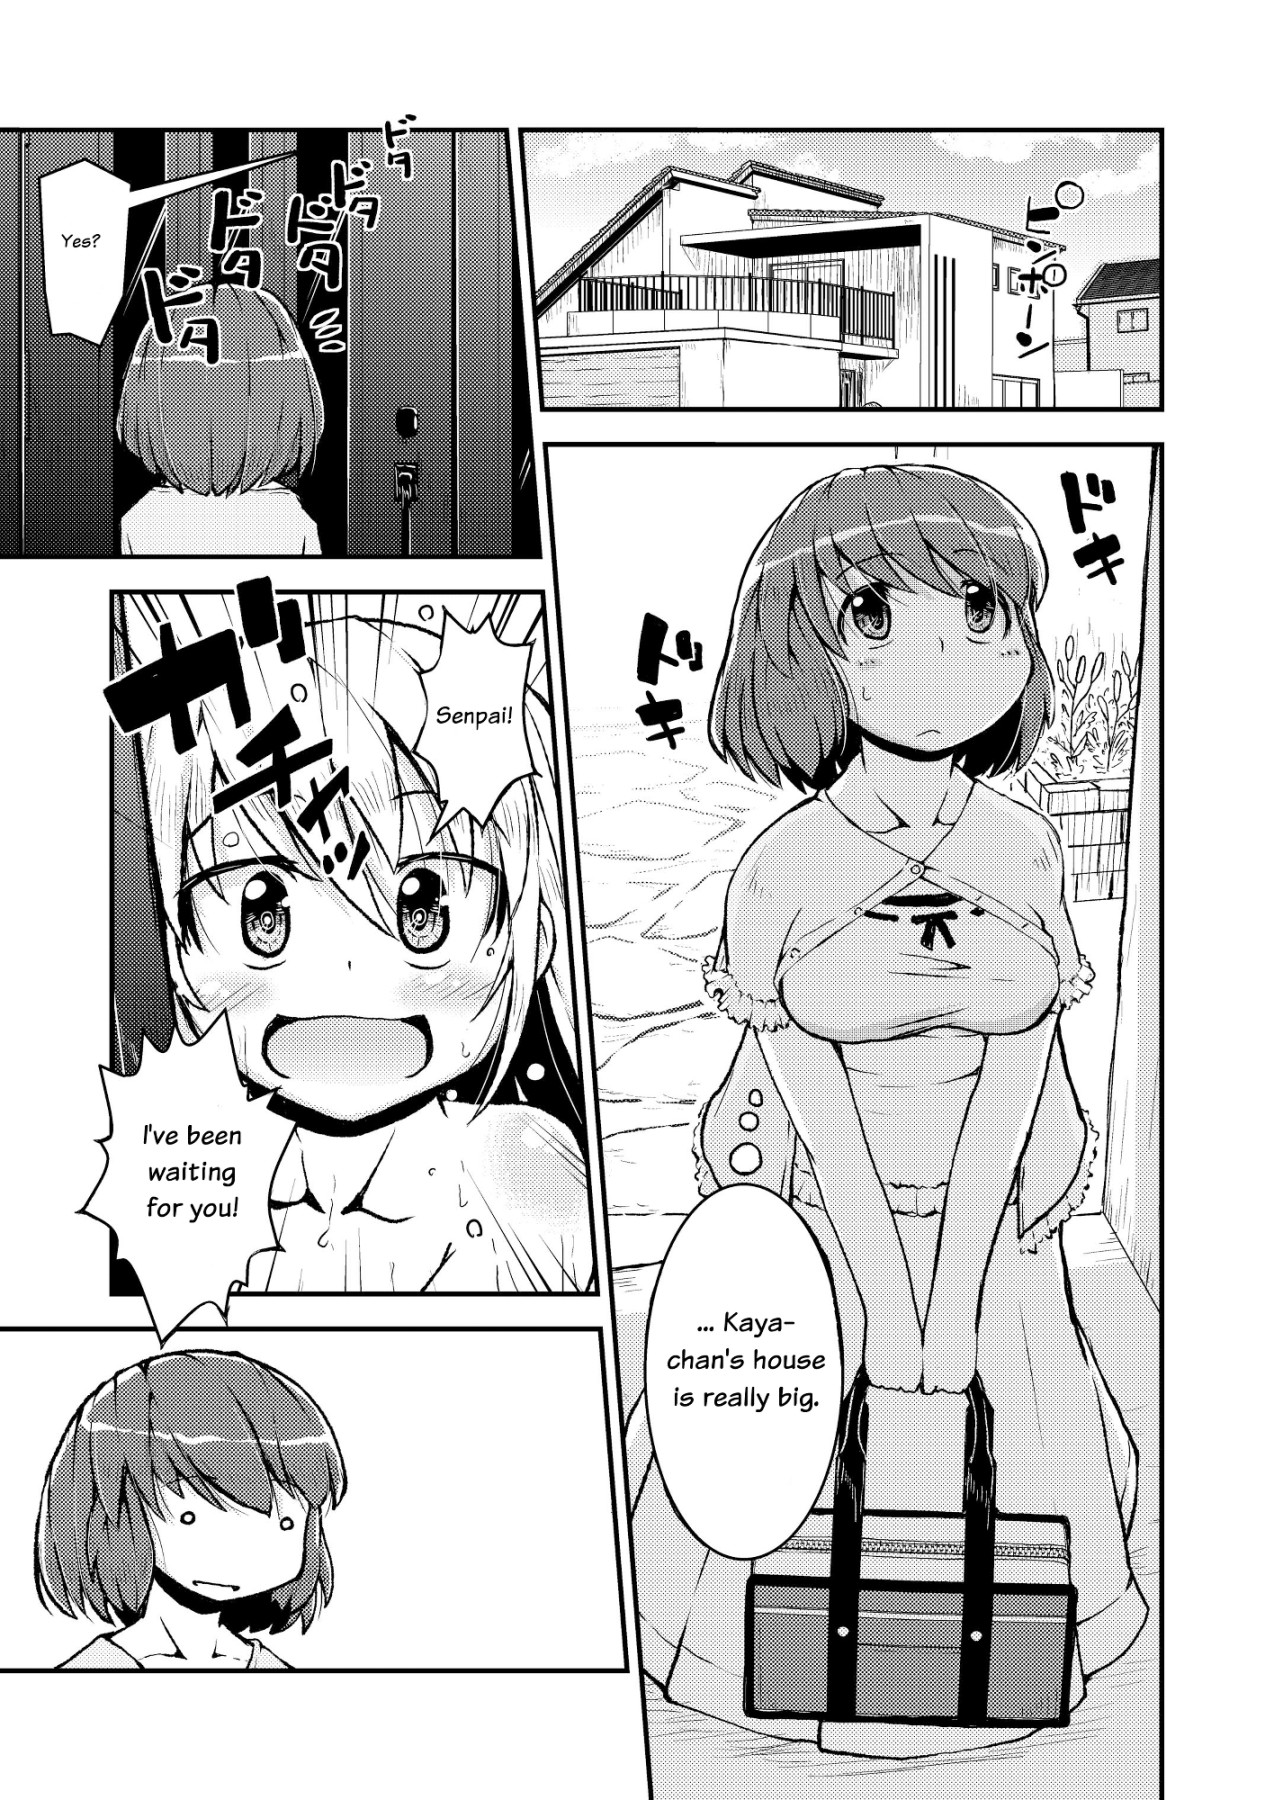 Hentai Manga Comic-A Compilation Of Being Together With Senpai All Night Long-Read-3